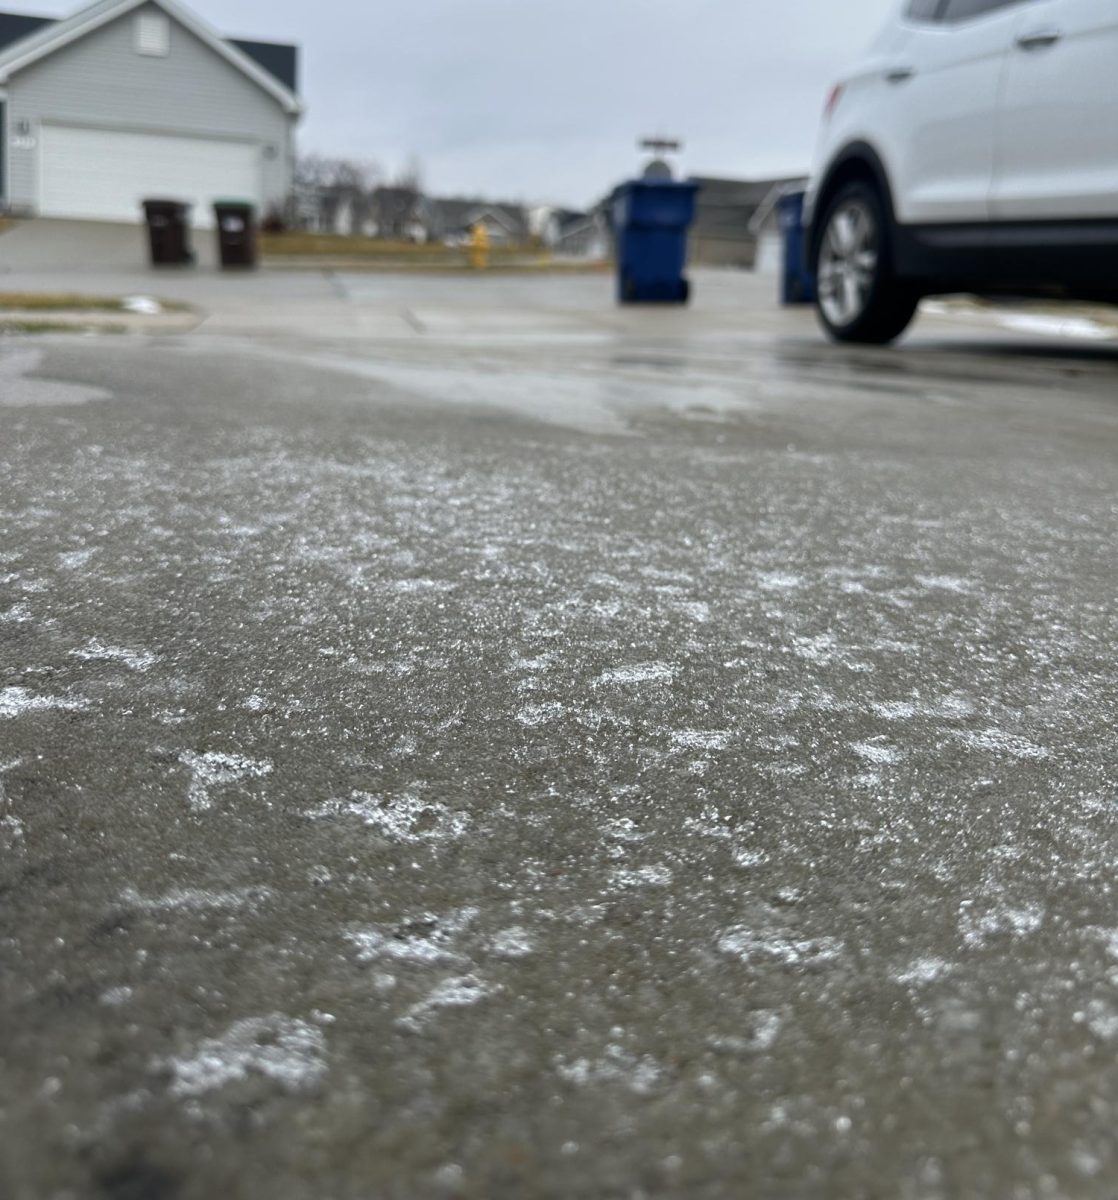 Ice coats the driveway and sidewalks Tuesday morning restricting travel on the west side of the district by NPHS and HOLT areas.